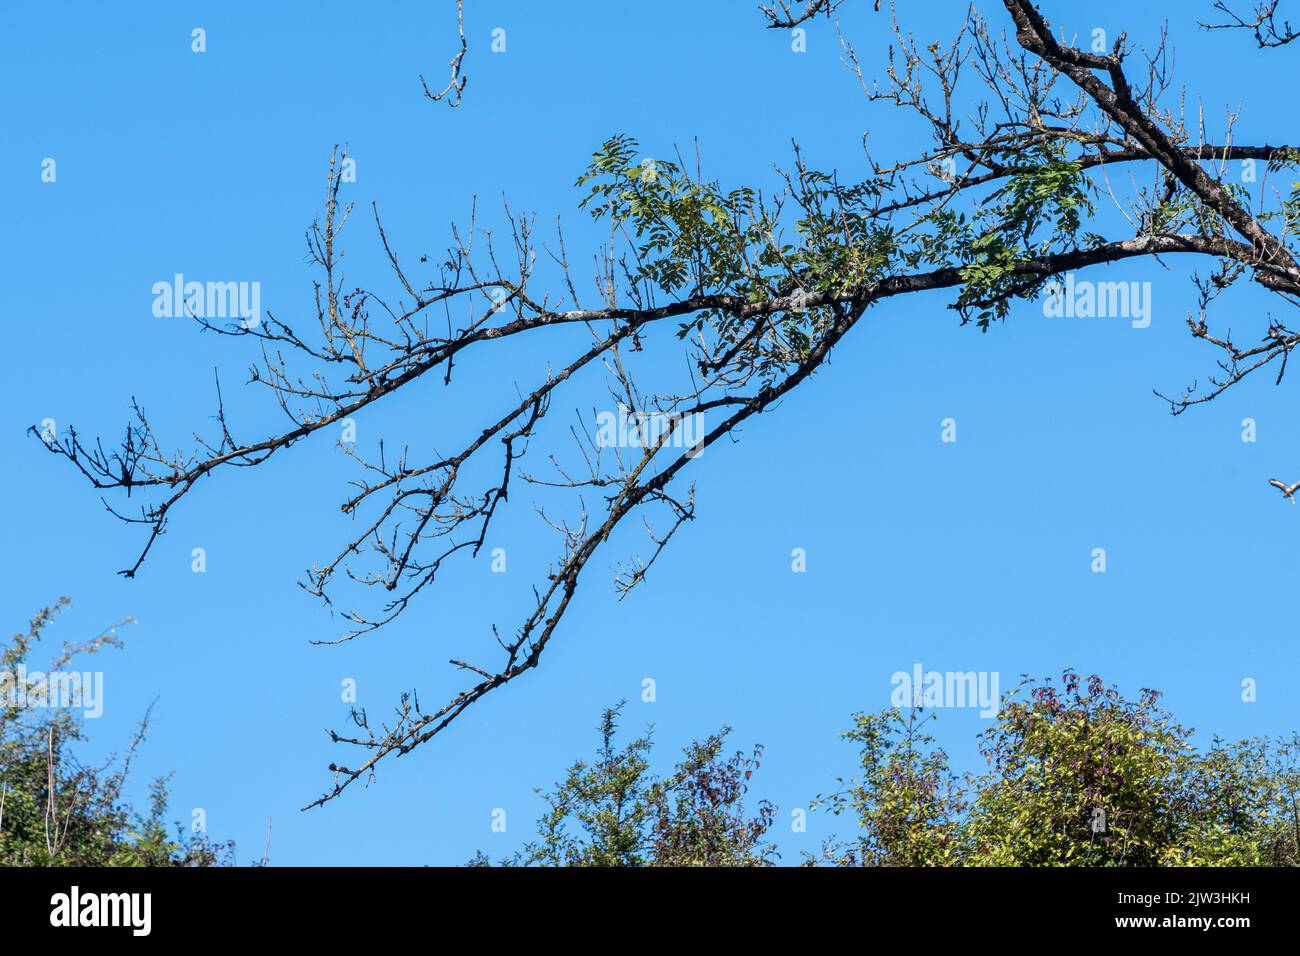 Ash dieback disease signs in ash trees (Fraxinus excelsior), caused by Hymenoscyphus fraxineus, an ascomycete fungus, UK Stock Photo